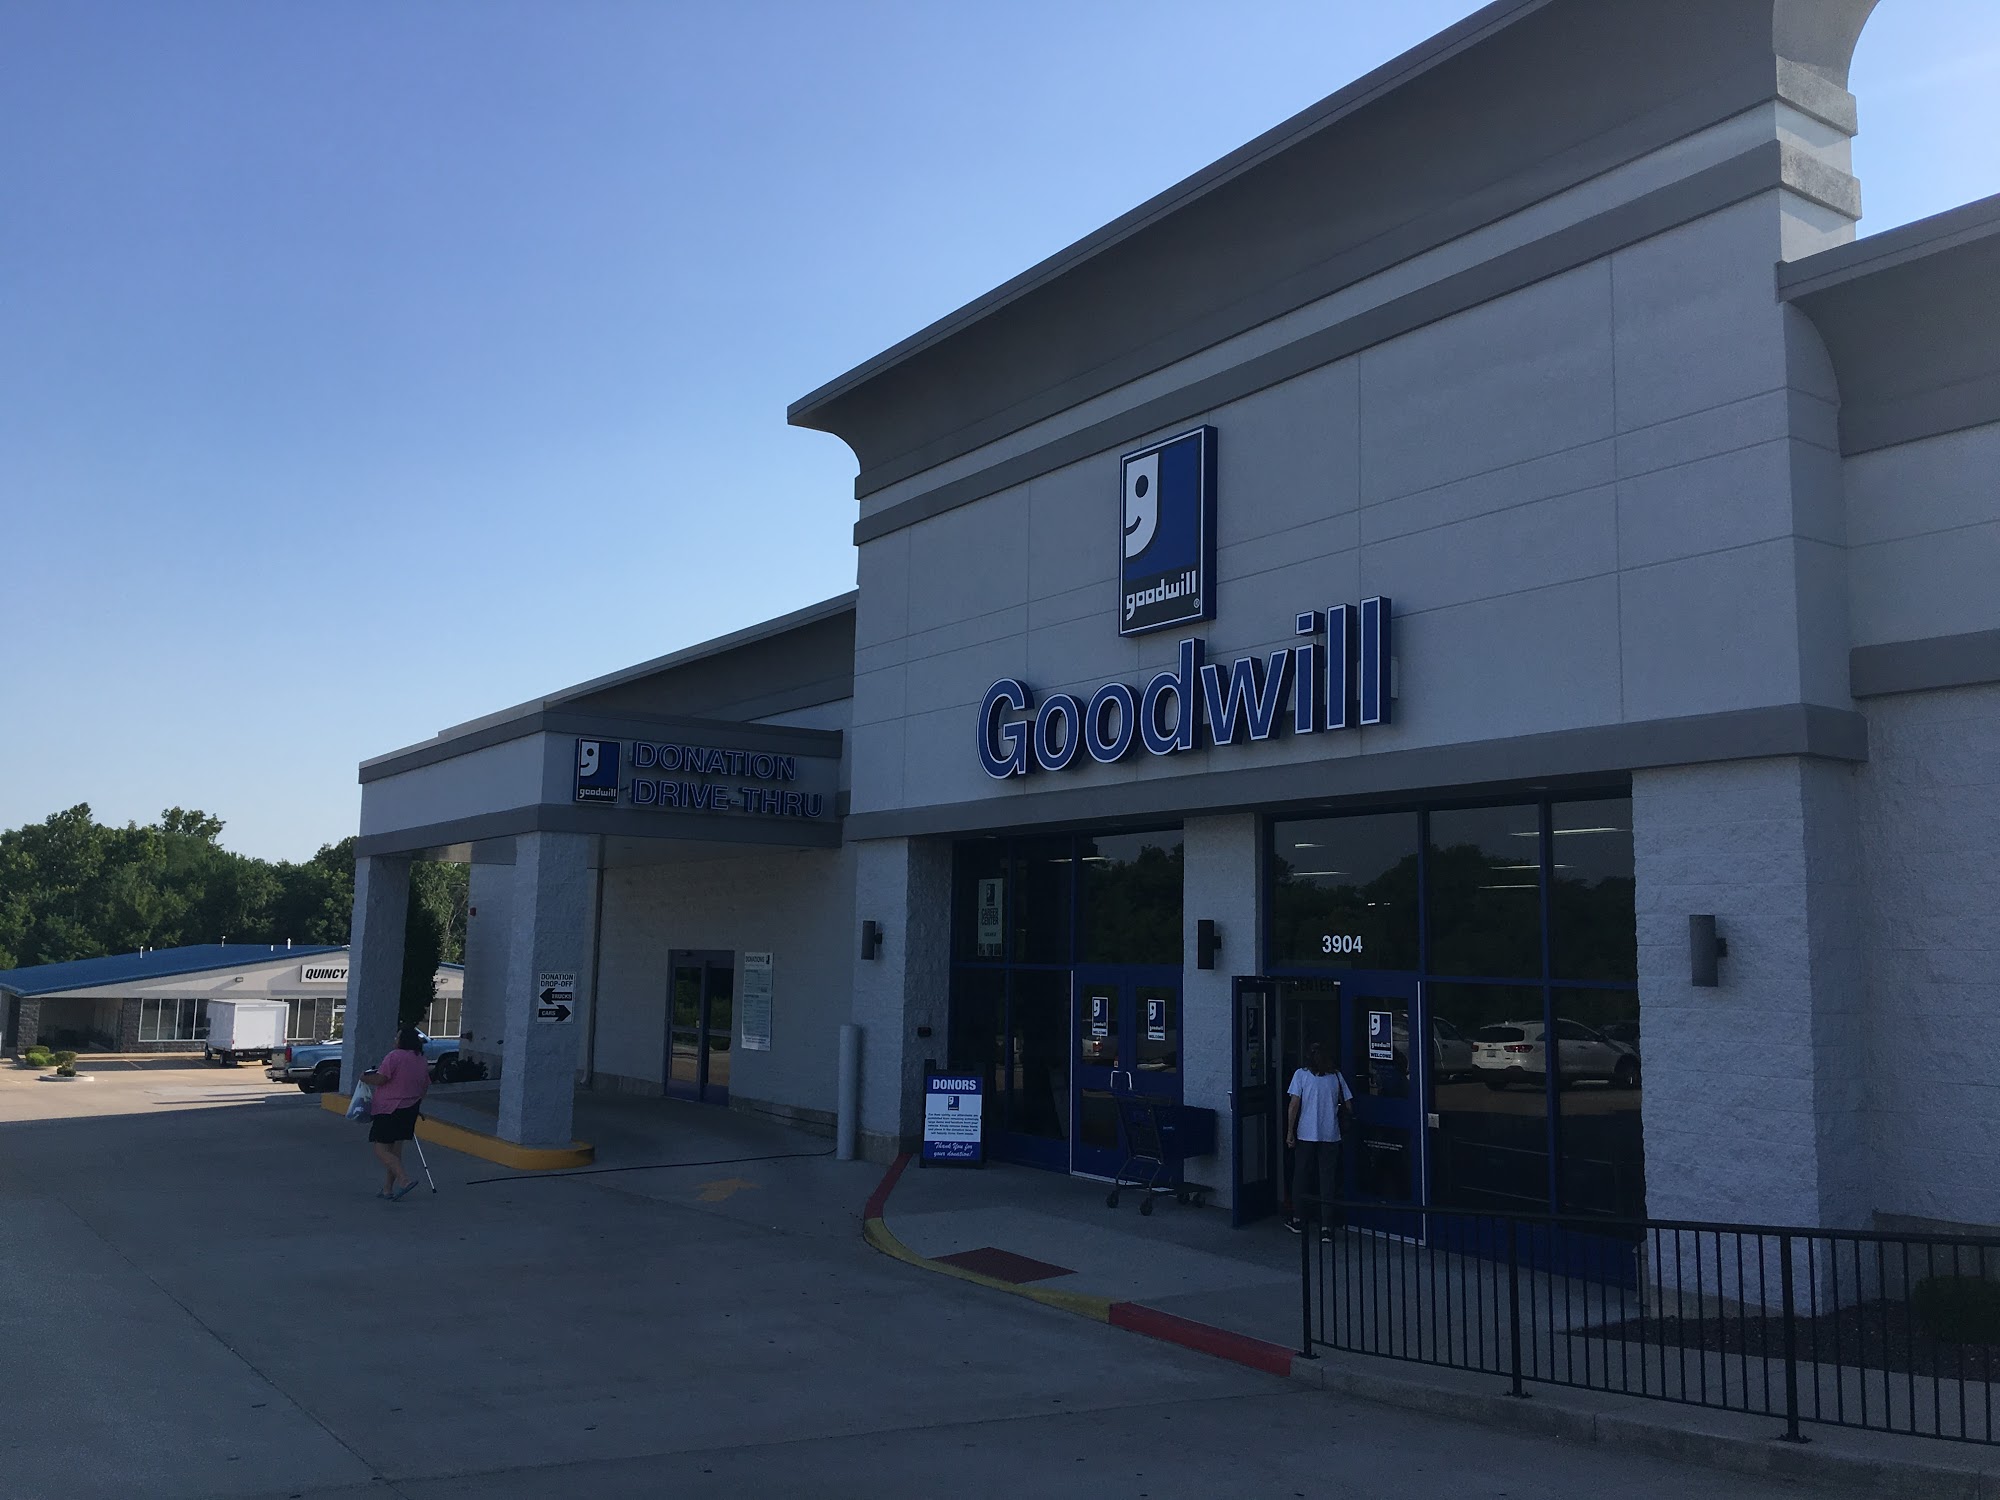 Goodwill Quincy IL - Land of Lincoln Goodwill Industries